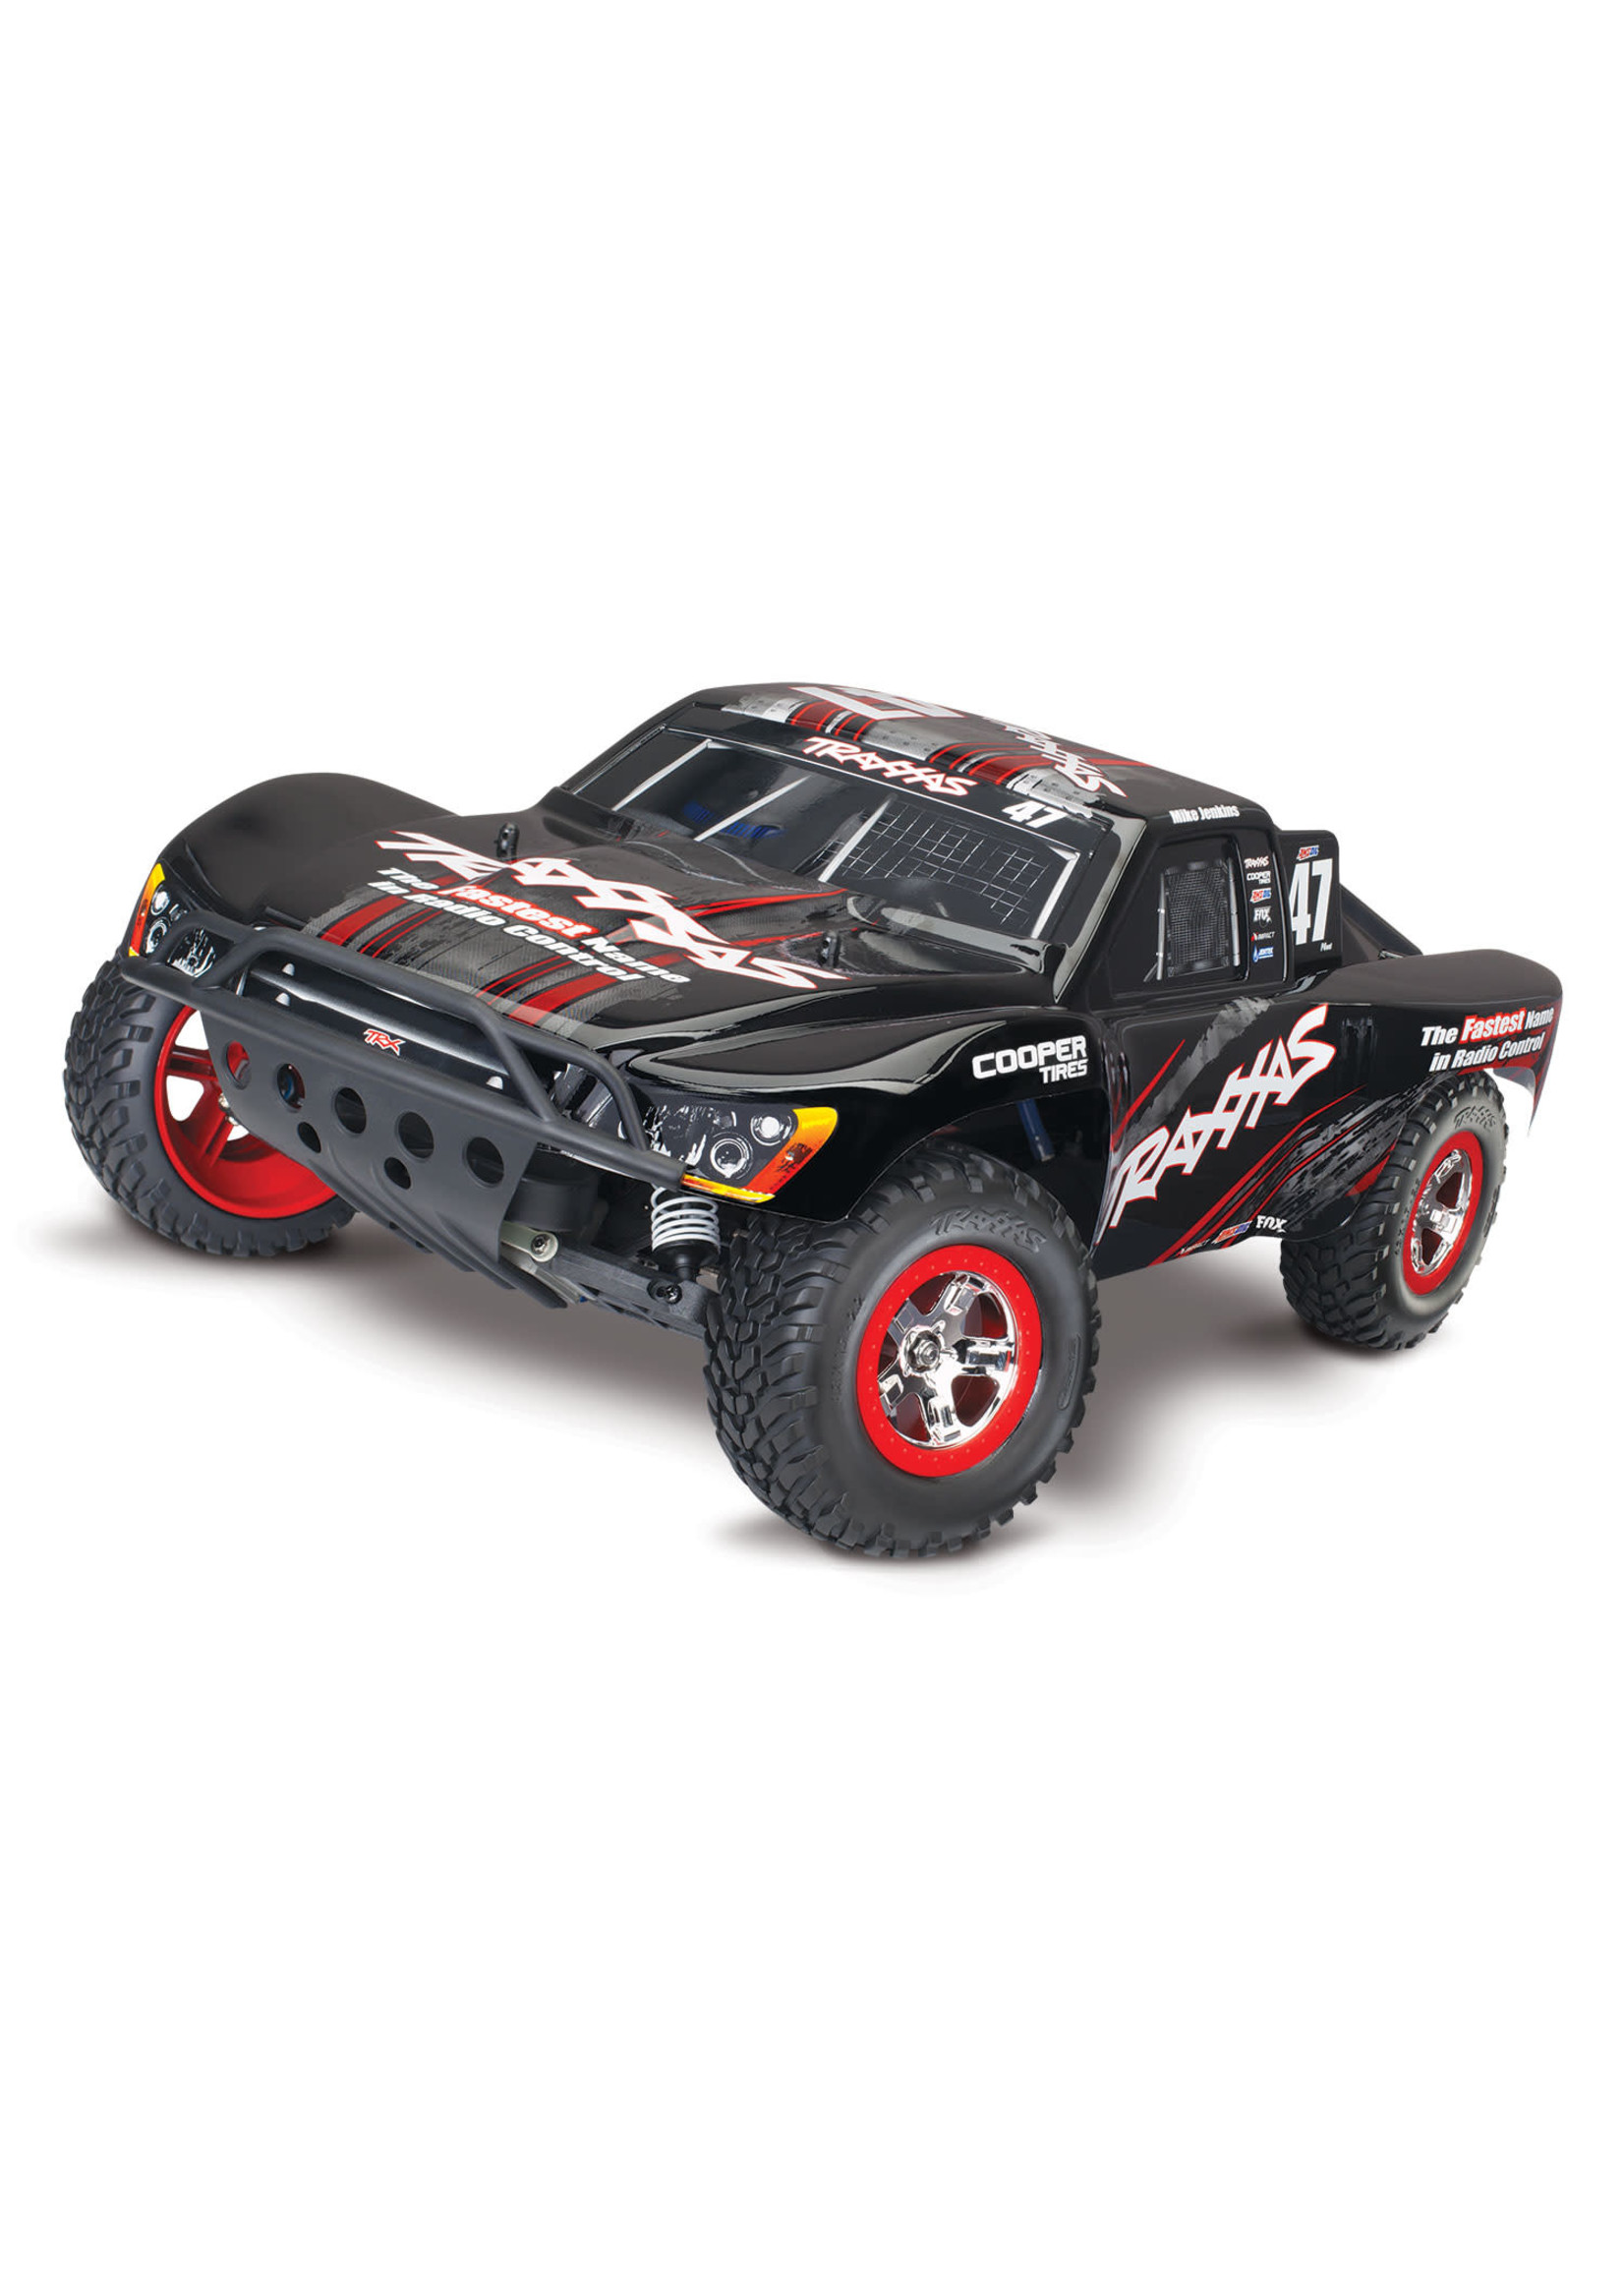 Traxxas TRA44056-3 Traxxas Nitro Slash: 1/10-Scale Nitro-Powered 2WD Short Course Racing Truck with TQi Traxxas Link Enabled 2.4Ghz Radio System And Traxxas Stability Management (TSM)